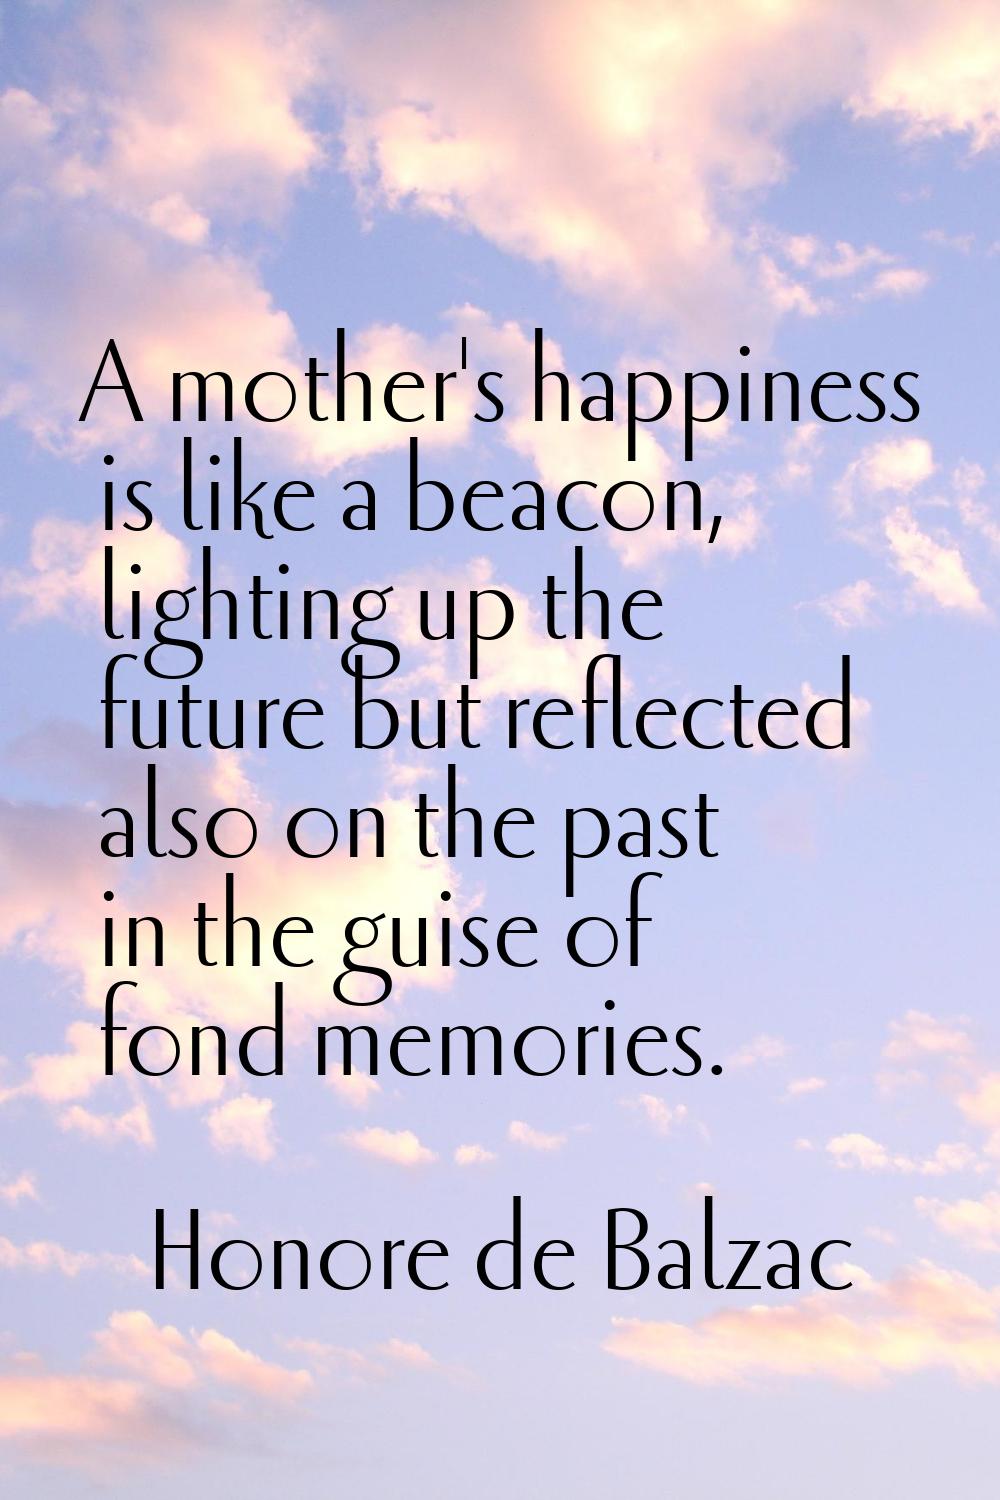 A mother's happiness is like a beacon, lighting up the future but reflected also on the past in the